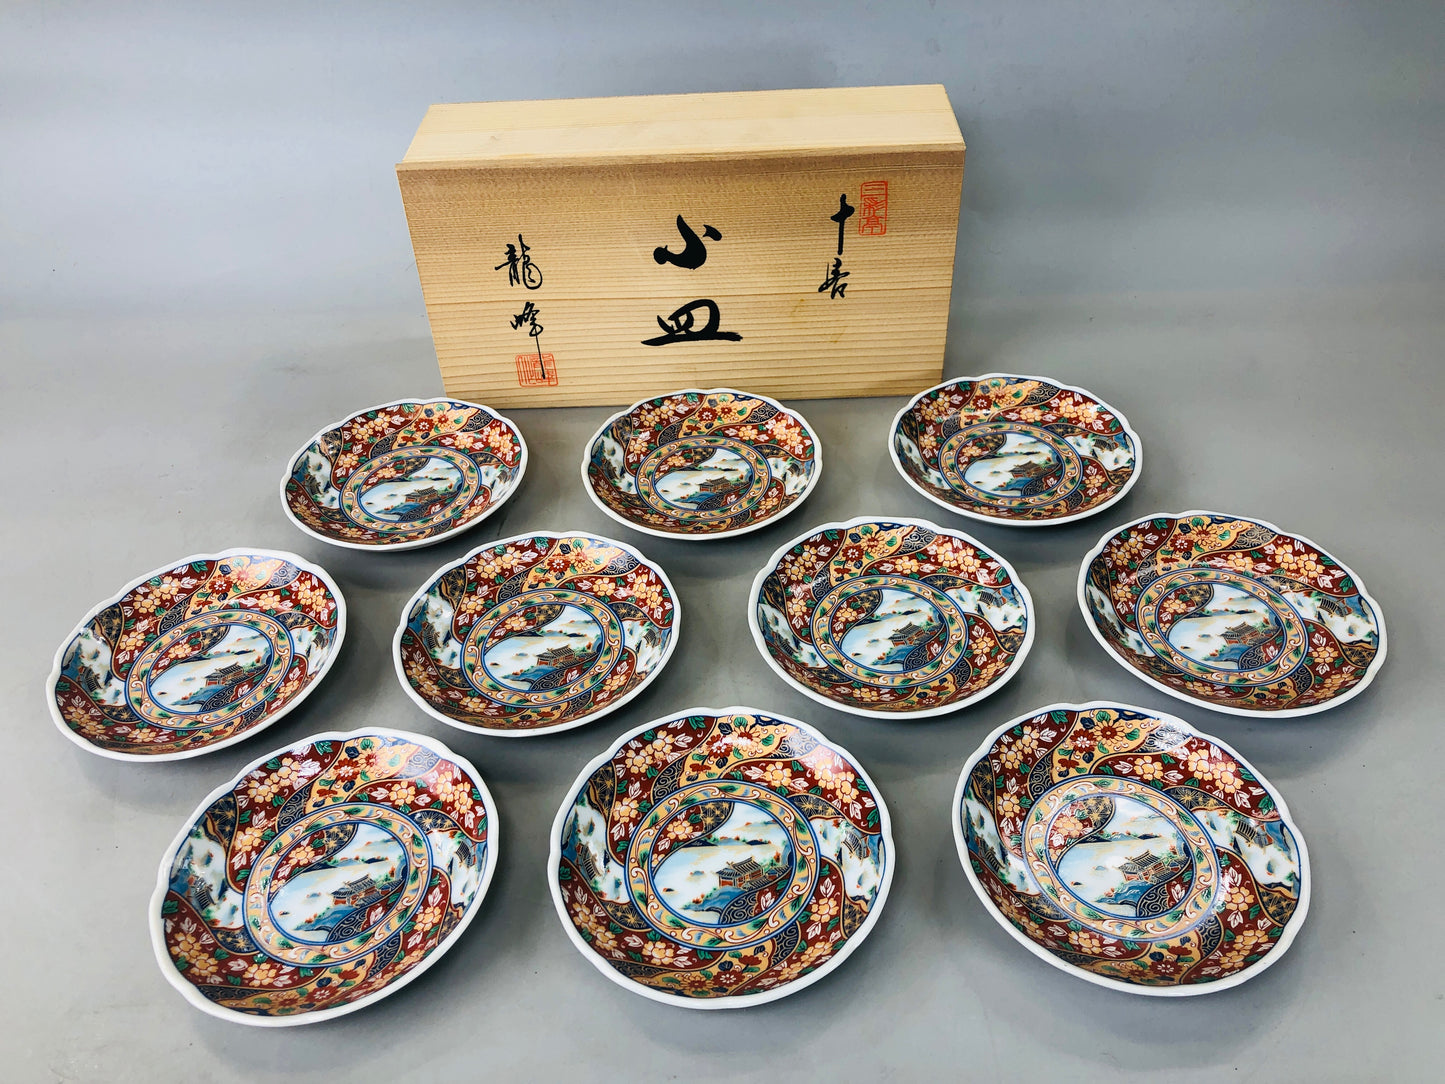 Y5901 DISH Arita-ware small plate set of 10 signed box Japan antique tableware